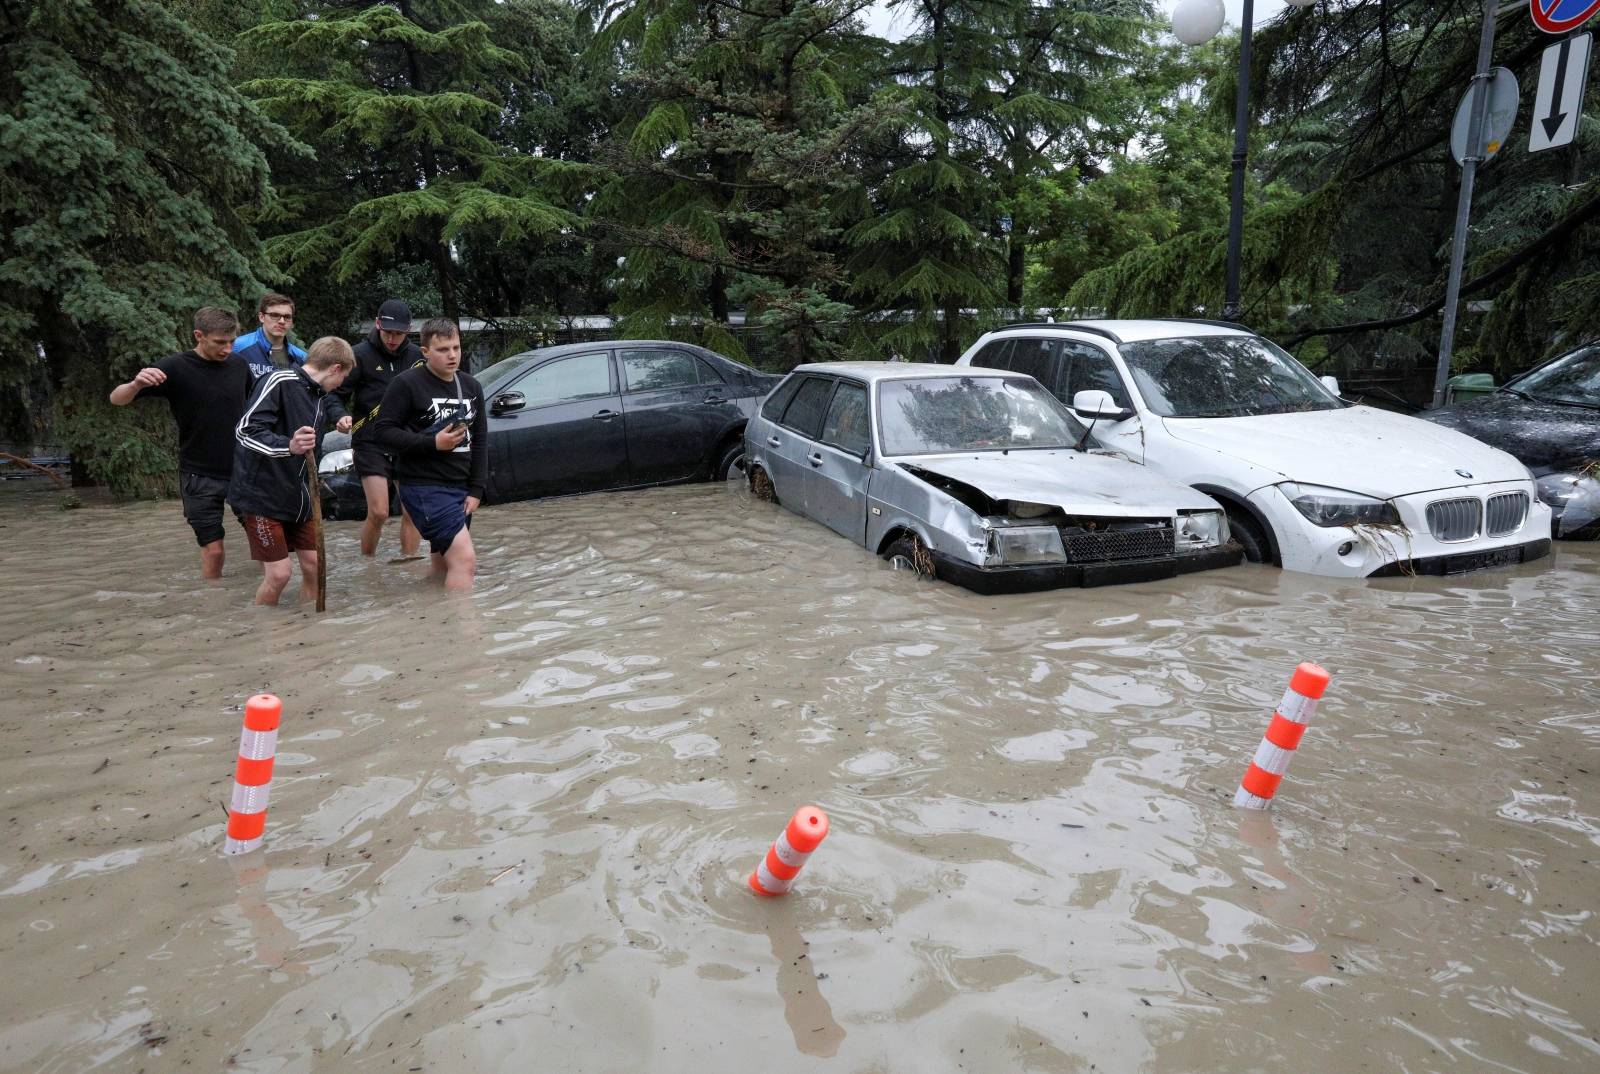 Cars are stuck in deep water in a flooded street following heavy rainfall in Yalta